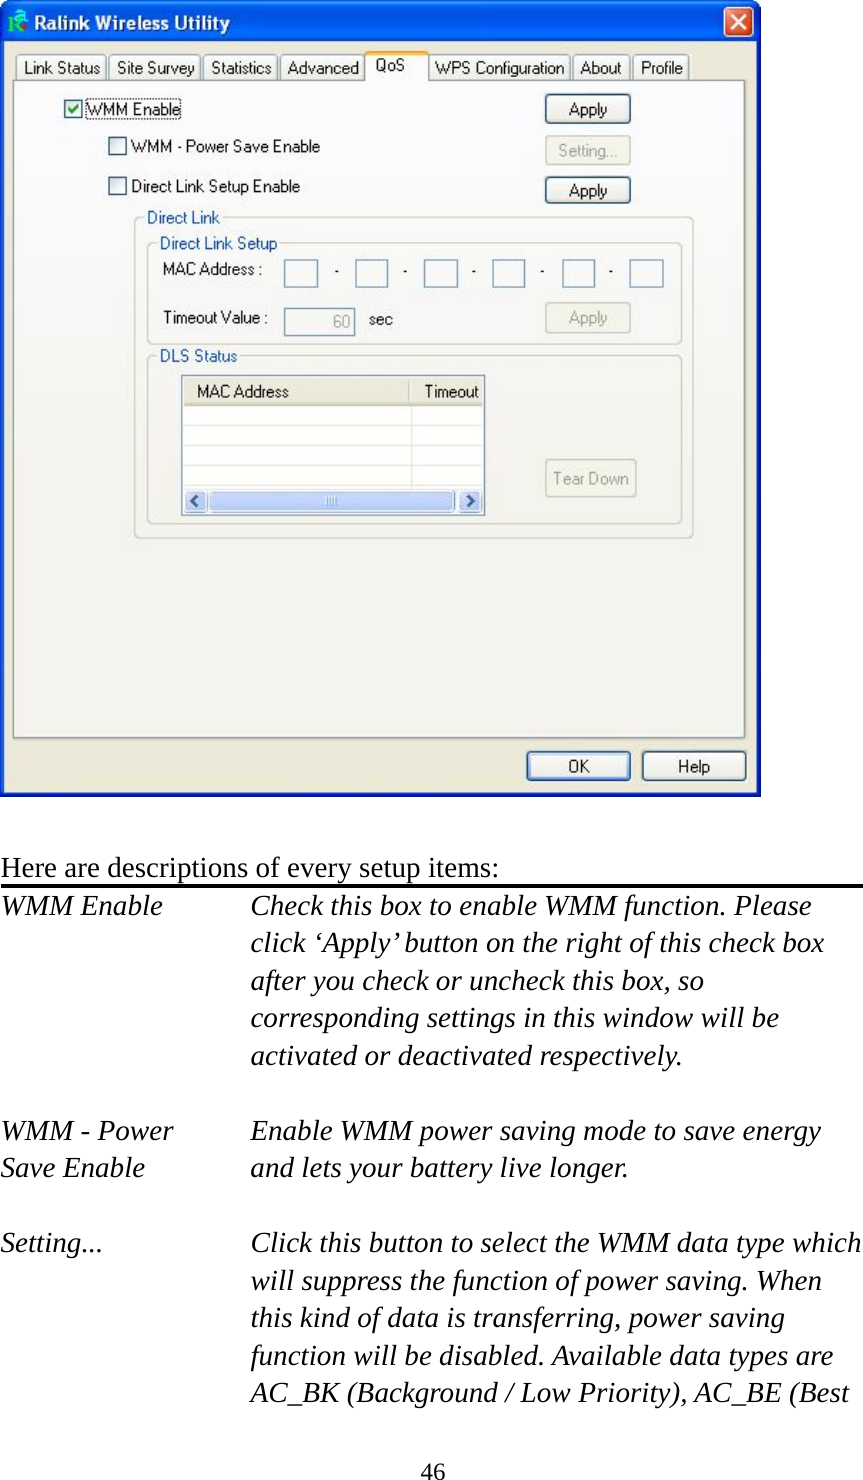  46  Here are descriptions of every setup items: WMM Enable  Check this box to enable WMM function. Please click ‘Apply’ button on the right of this check box after you check or uncheck this box, so corresponding settings in this window will be activated or deactivated respectively.  WMM - Power  Enable WMM power saving mode to save energy Save Enable  and lets your battery live longer.  Setting...  Click this button to select the WMM data type which will suppress the function of power saving. When this kind of data is transferring, power saving function will be disabled. Available data types are AC_BK (Background / Low Priority), AC_BE (Best 